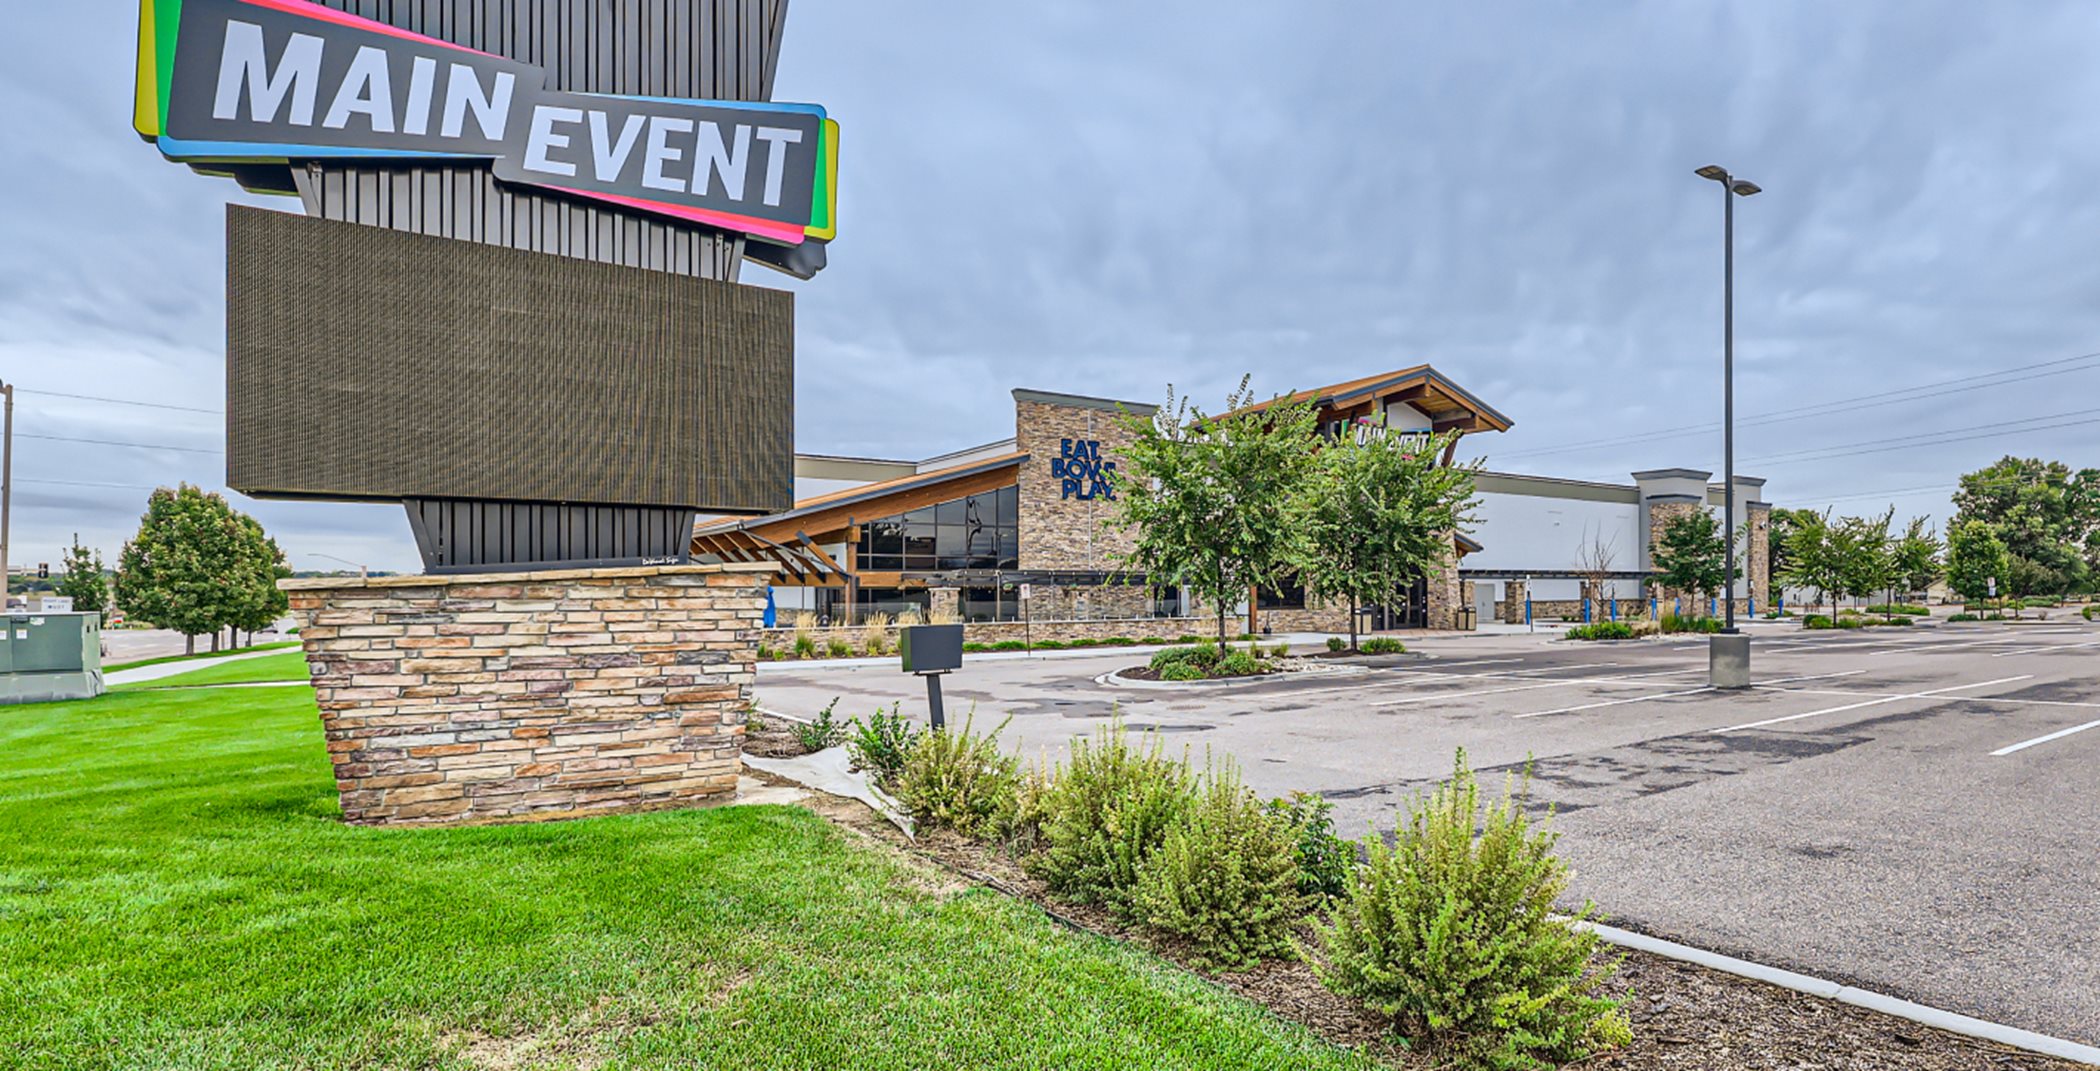 Main Event exterior and monument sign